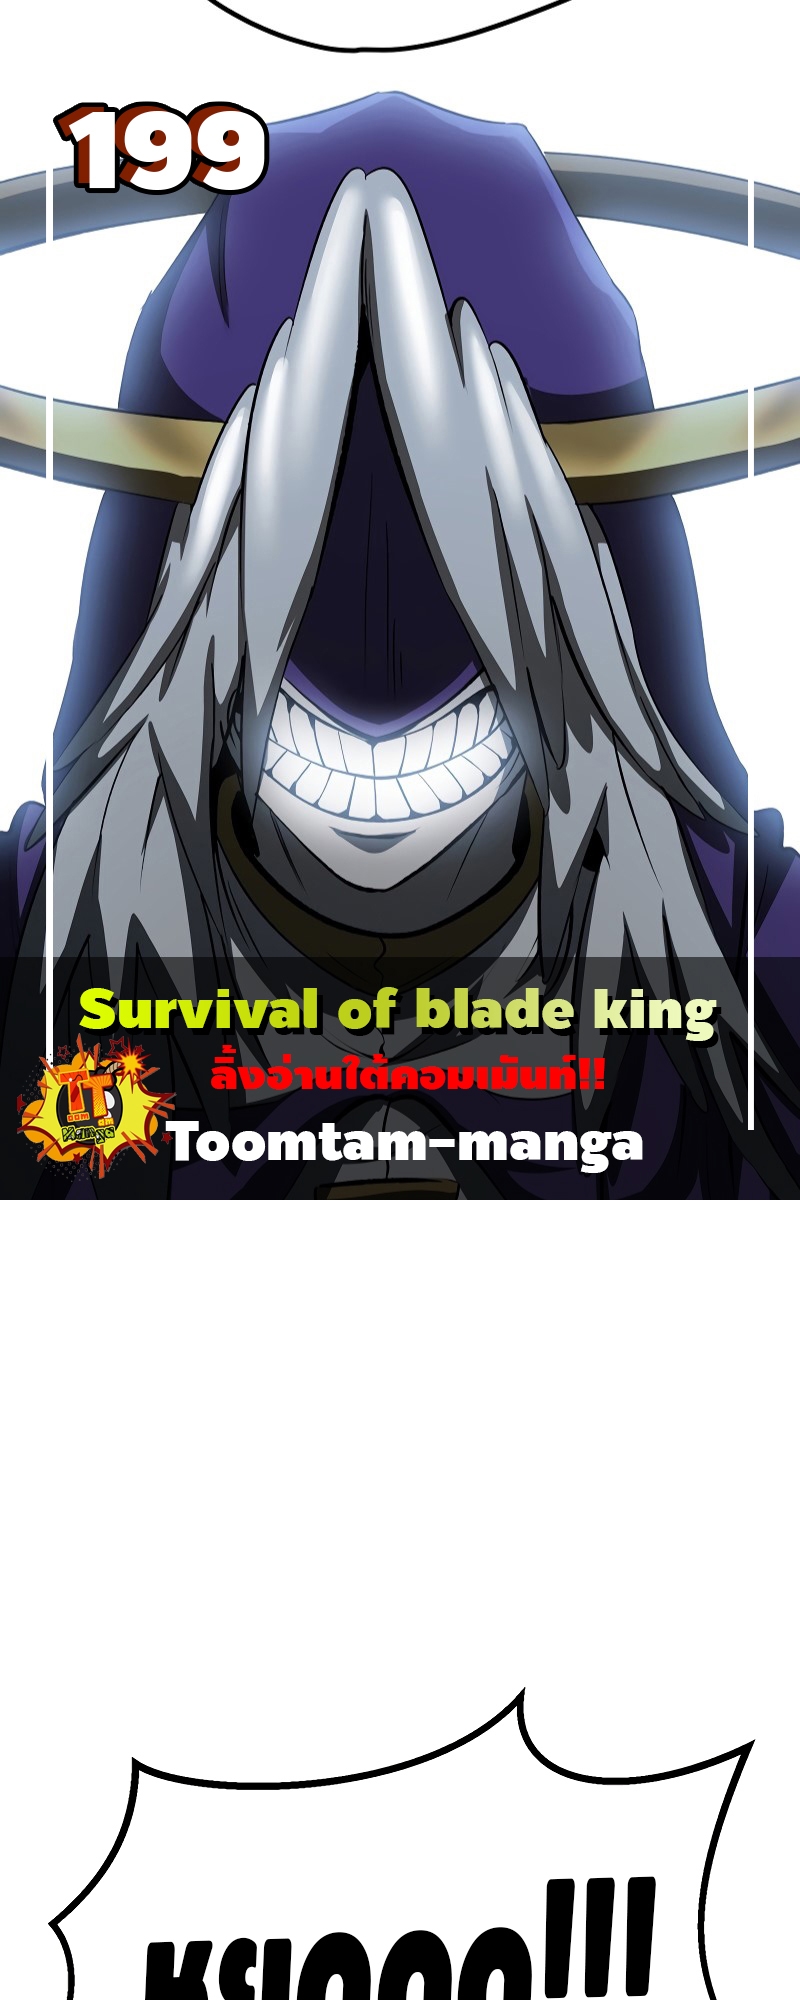 Survival of blade king 199 6 04 25670001